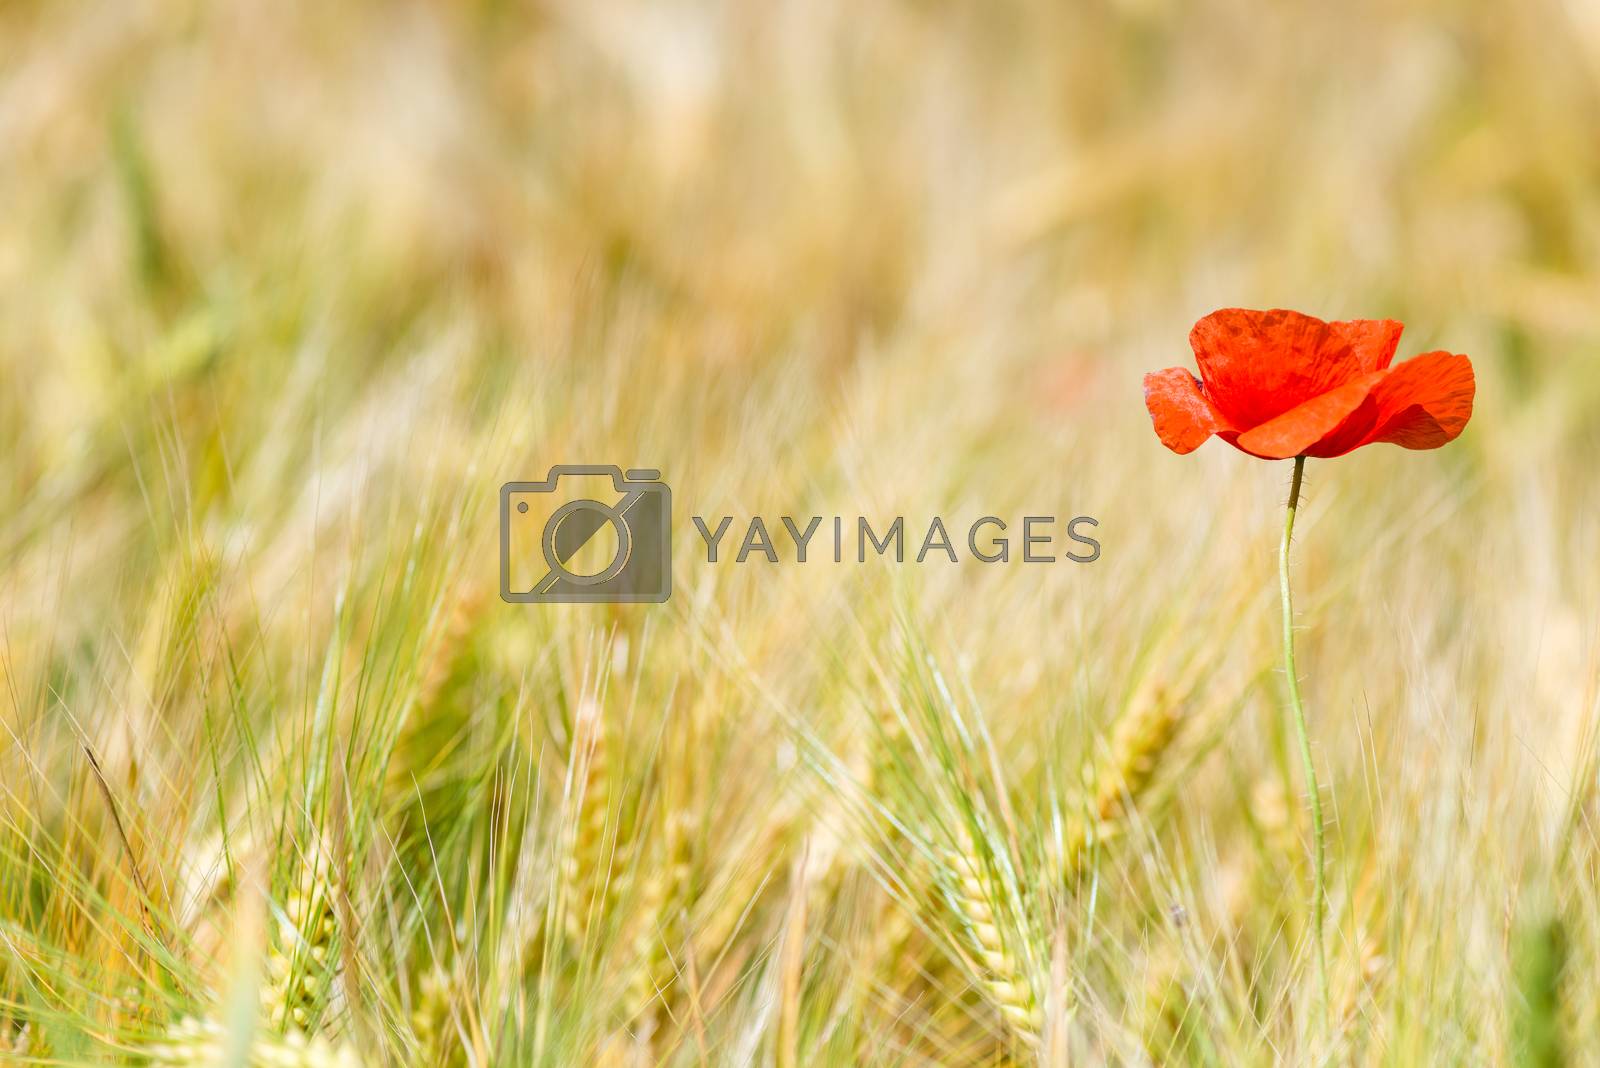 Royalty free image of horizontal photo red poppy in a yellow wheat field in the ears by kosmsos111